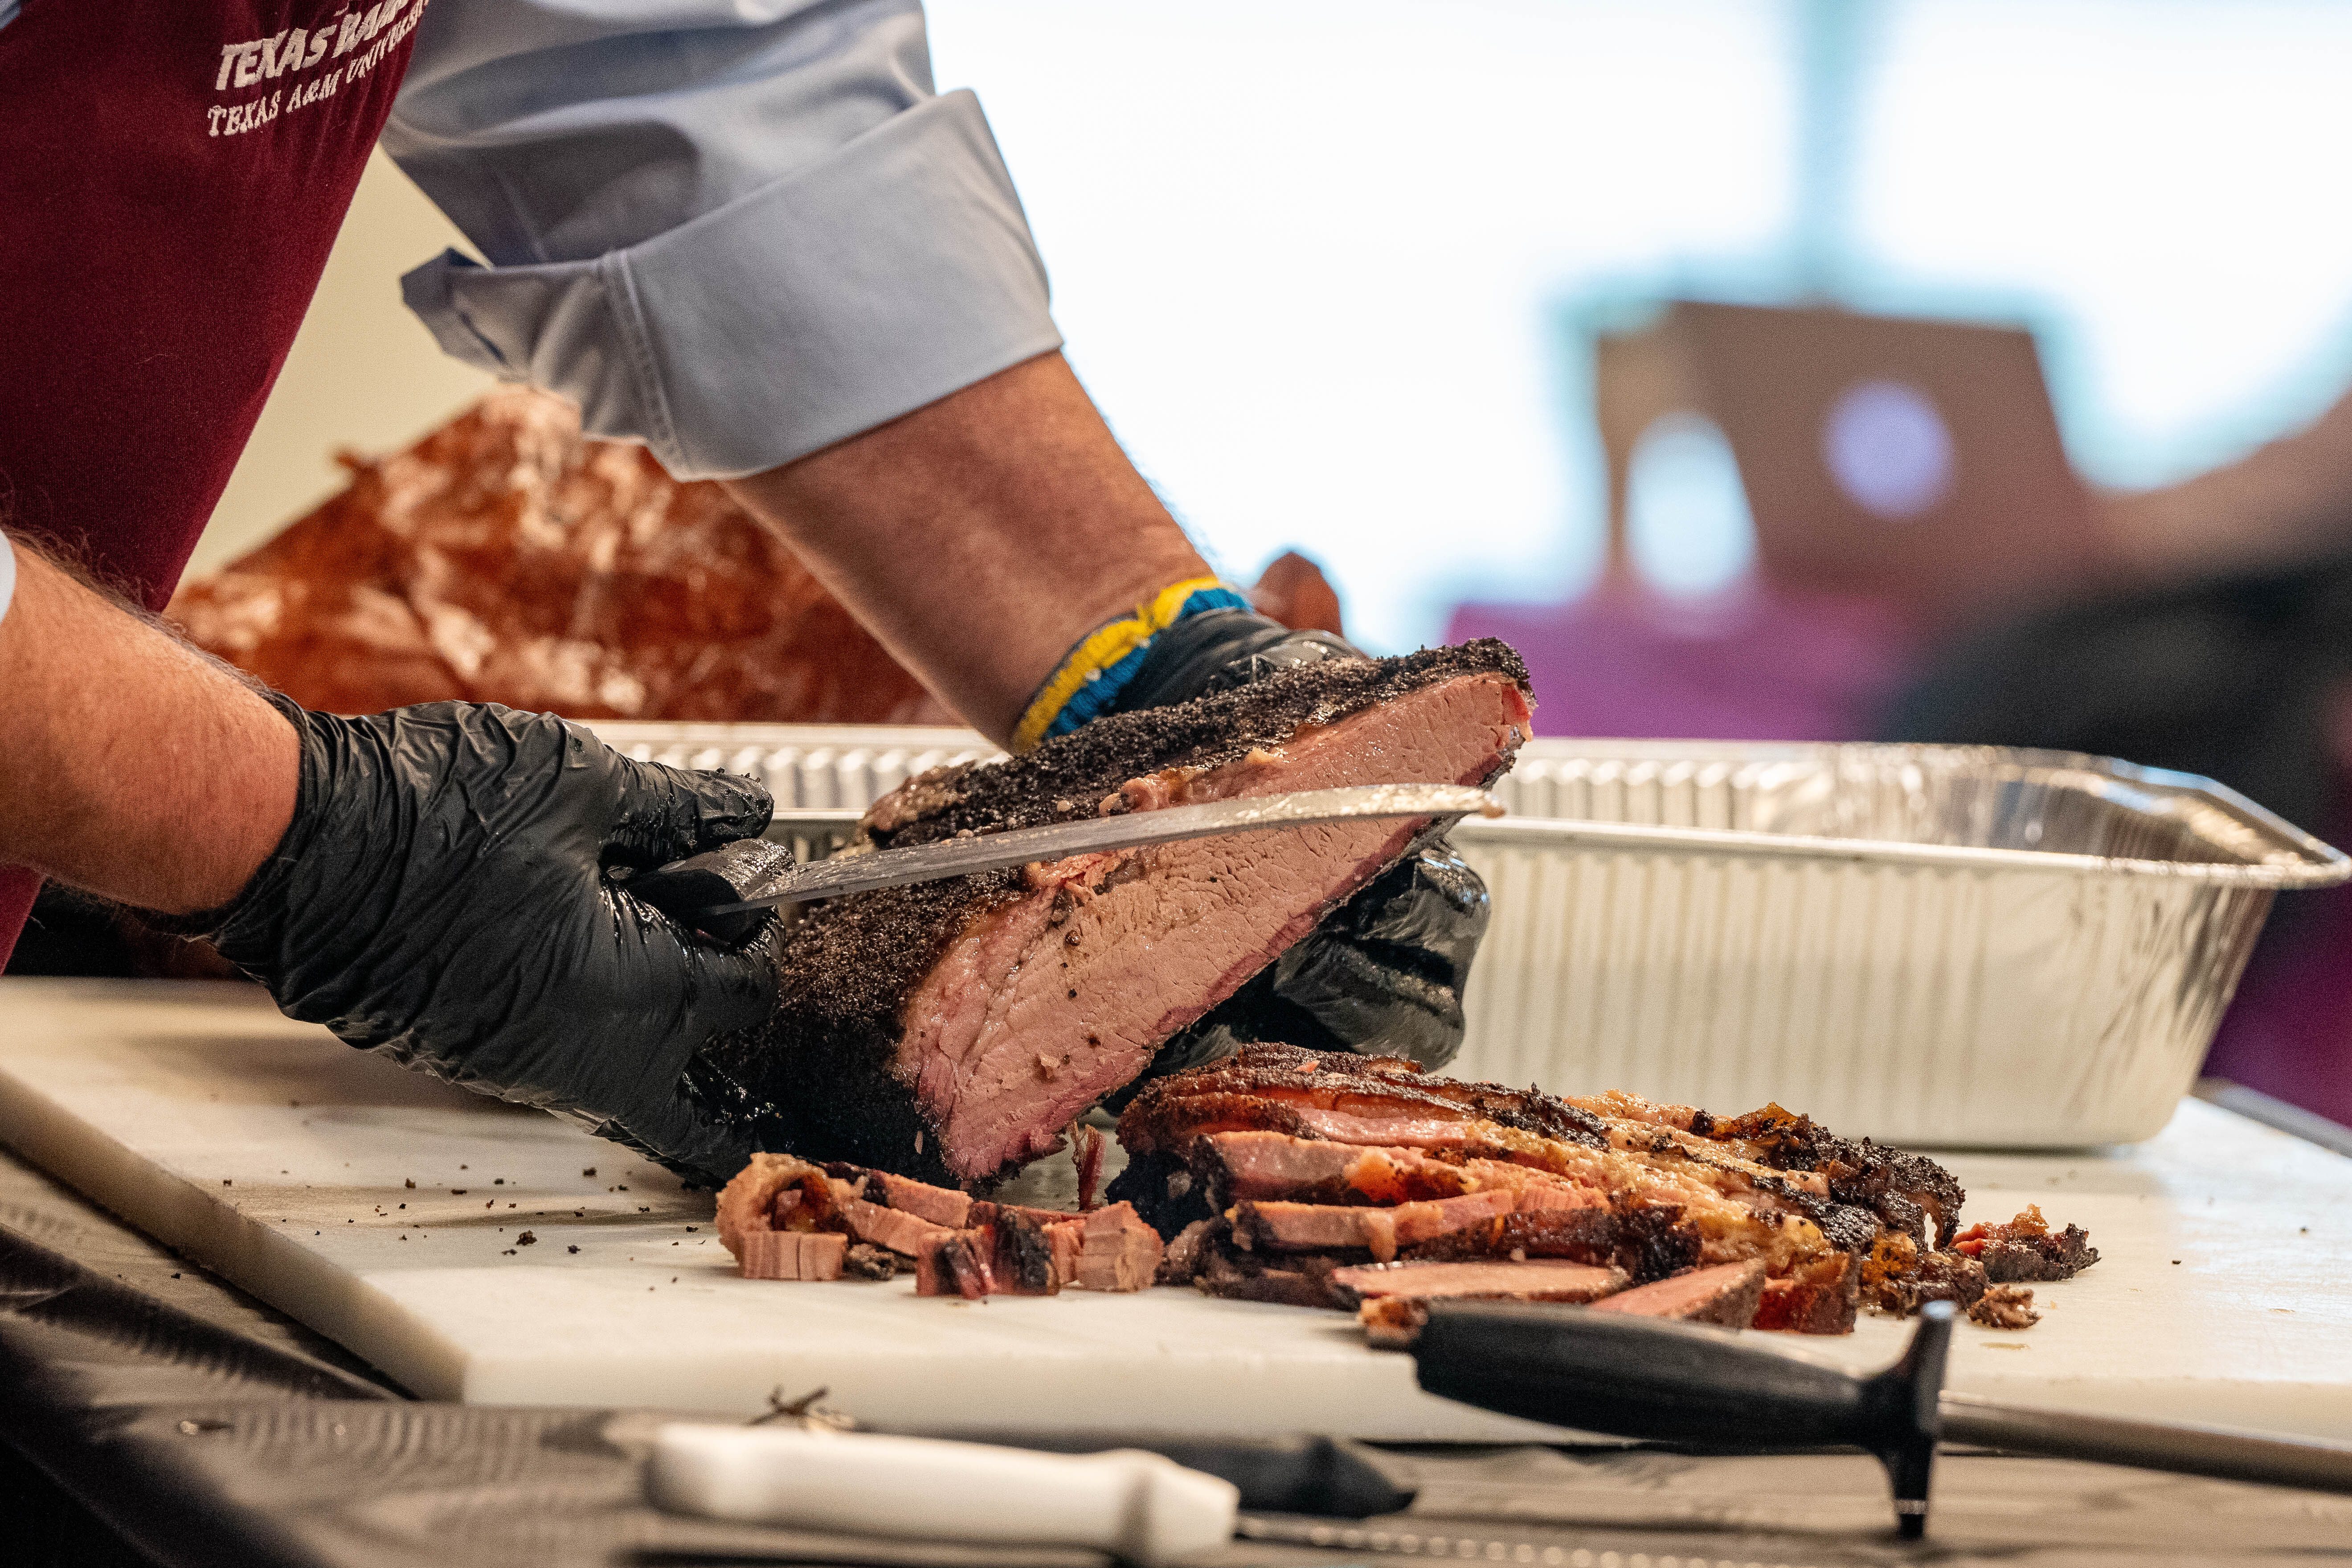 The Meat Science Program hosts an annual Brisket Camp